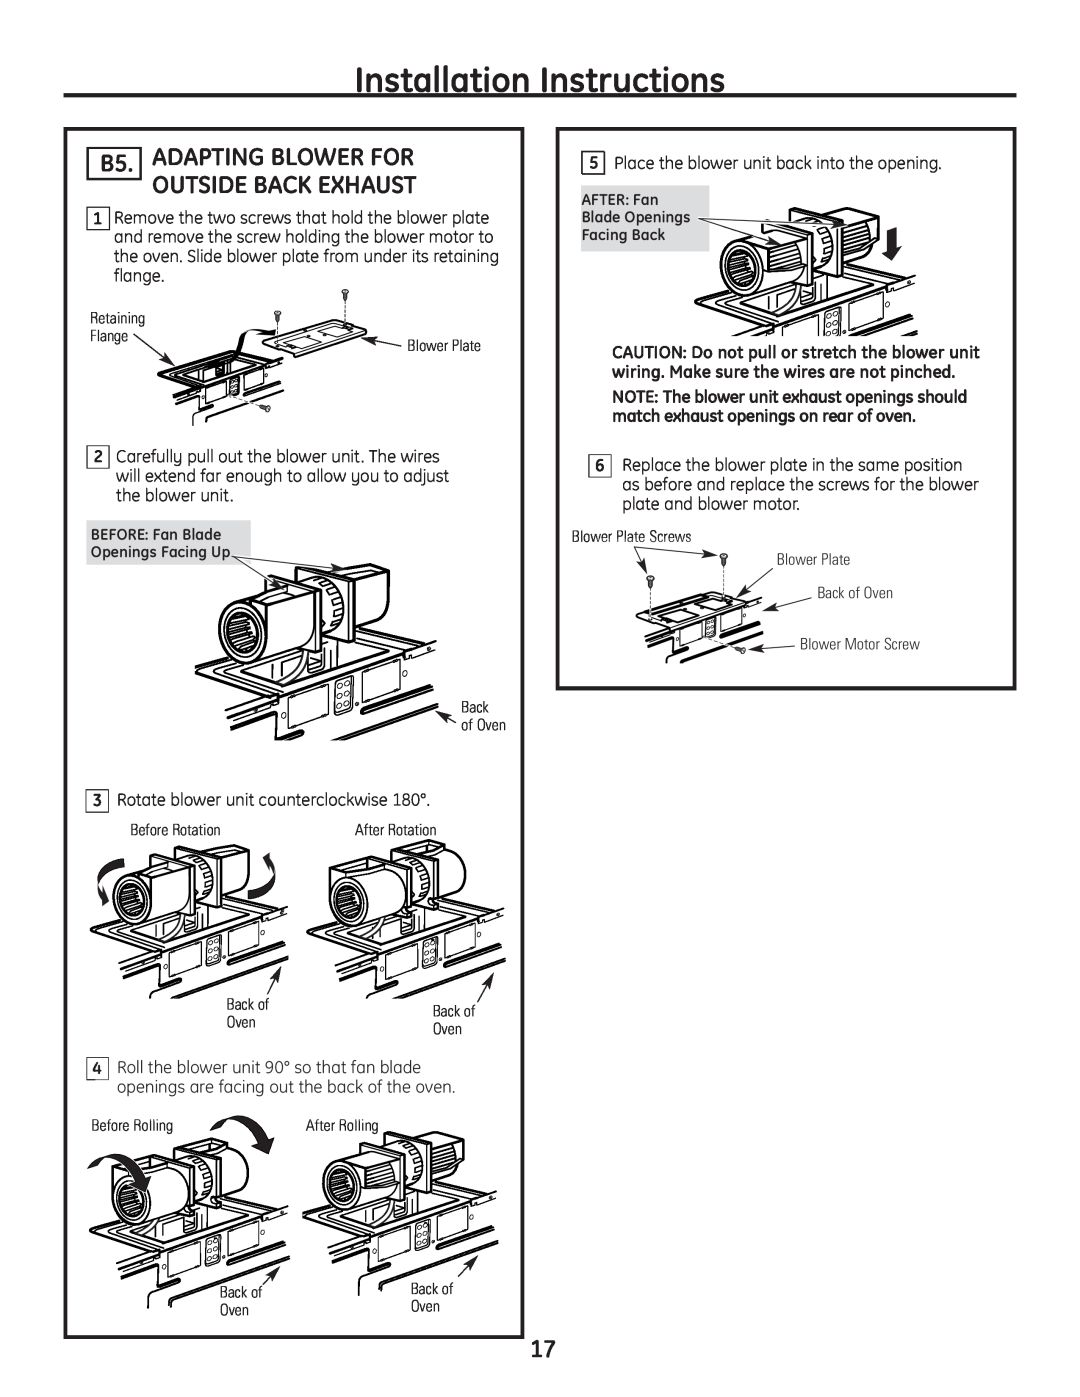 GE JVM1665SNSS warranty Installation Instructions, B5. ADAPTING BLOWER FOR OUTSIDE BACK EXHAUST 